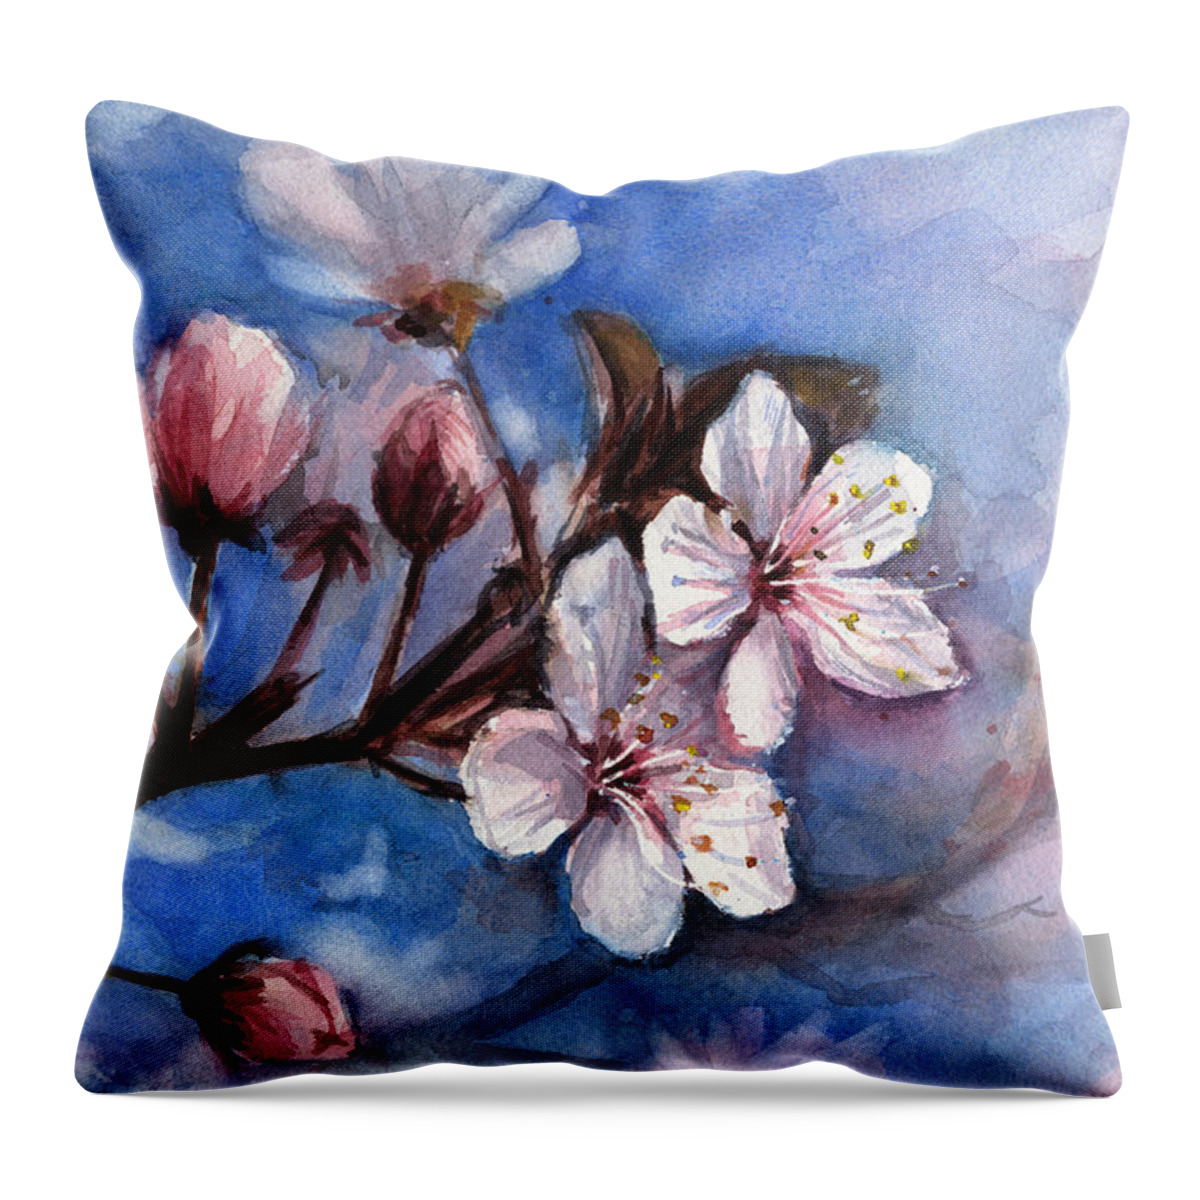 Spring Throw Pillow featuring the painting Cherry Blossoms by Olga Shvartsur